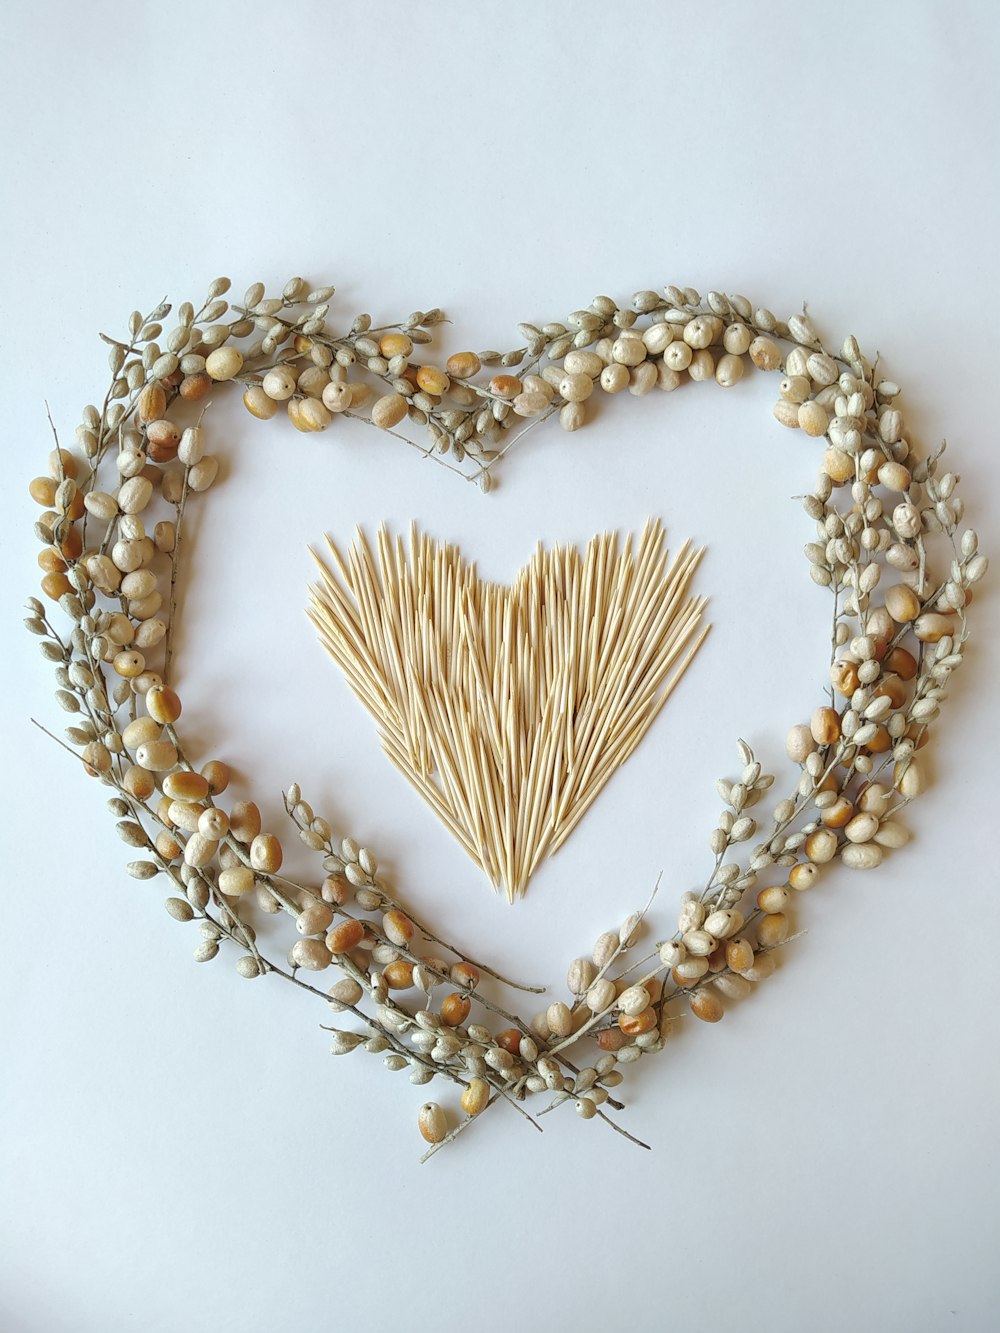 a heart made out of straw and dried flowers